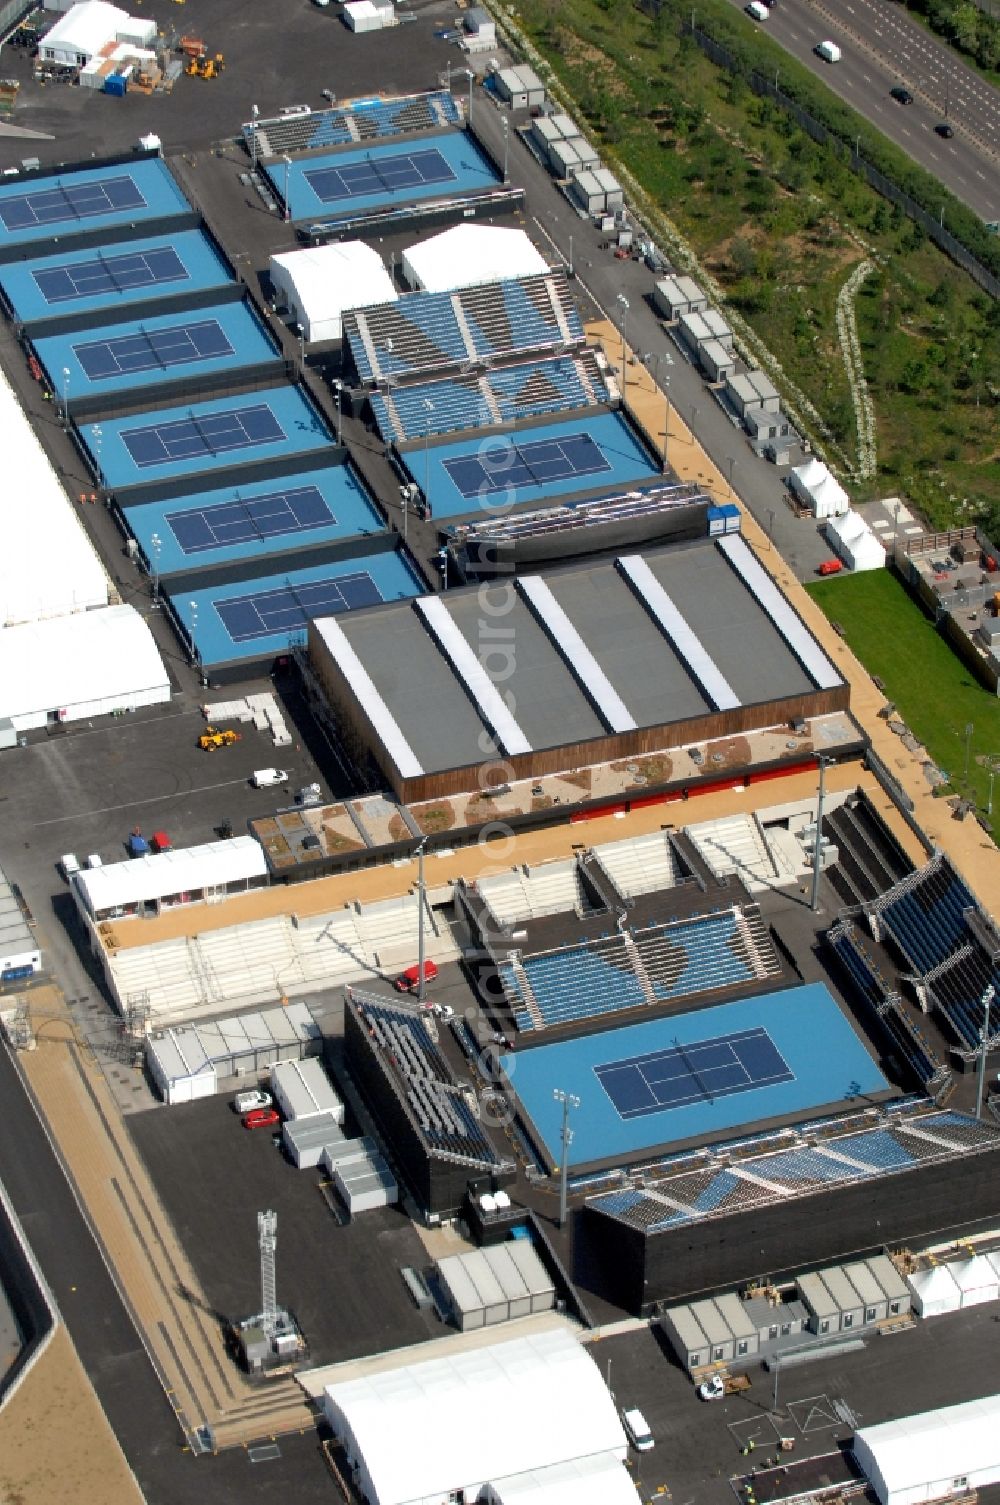 Aerial photograph London - Sports and Leisure Centre Eton Maonr in the district Leyton a training centre for water sportsman of the Olympic Games and venue of the wheelchair tennis tournaments of Paralympic Games 2012 in Great Britain